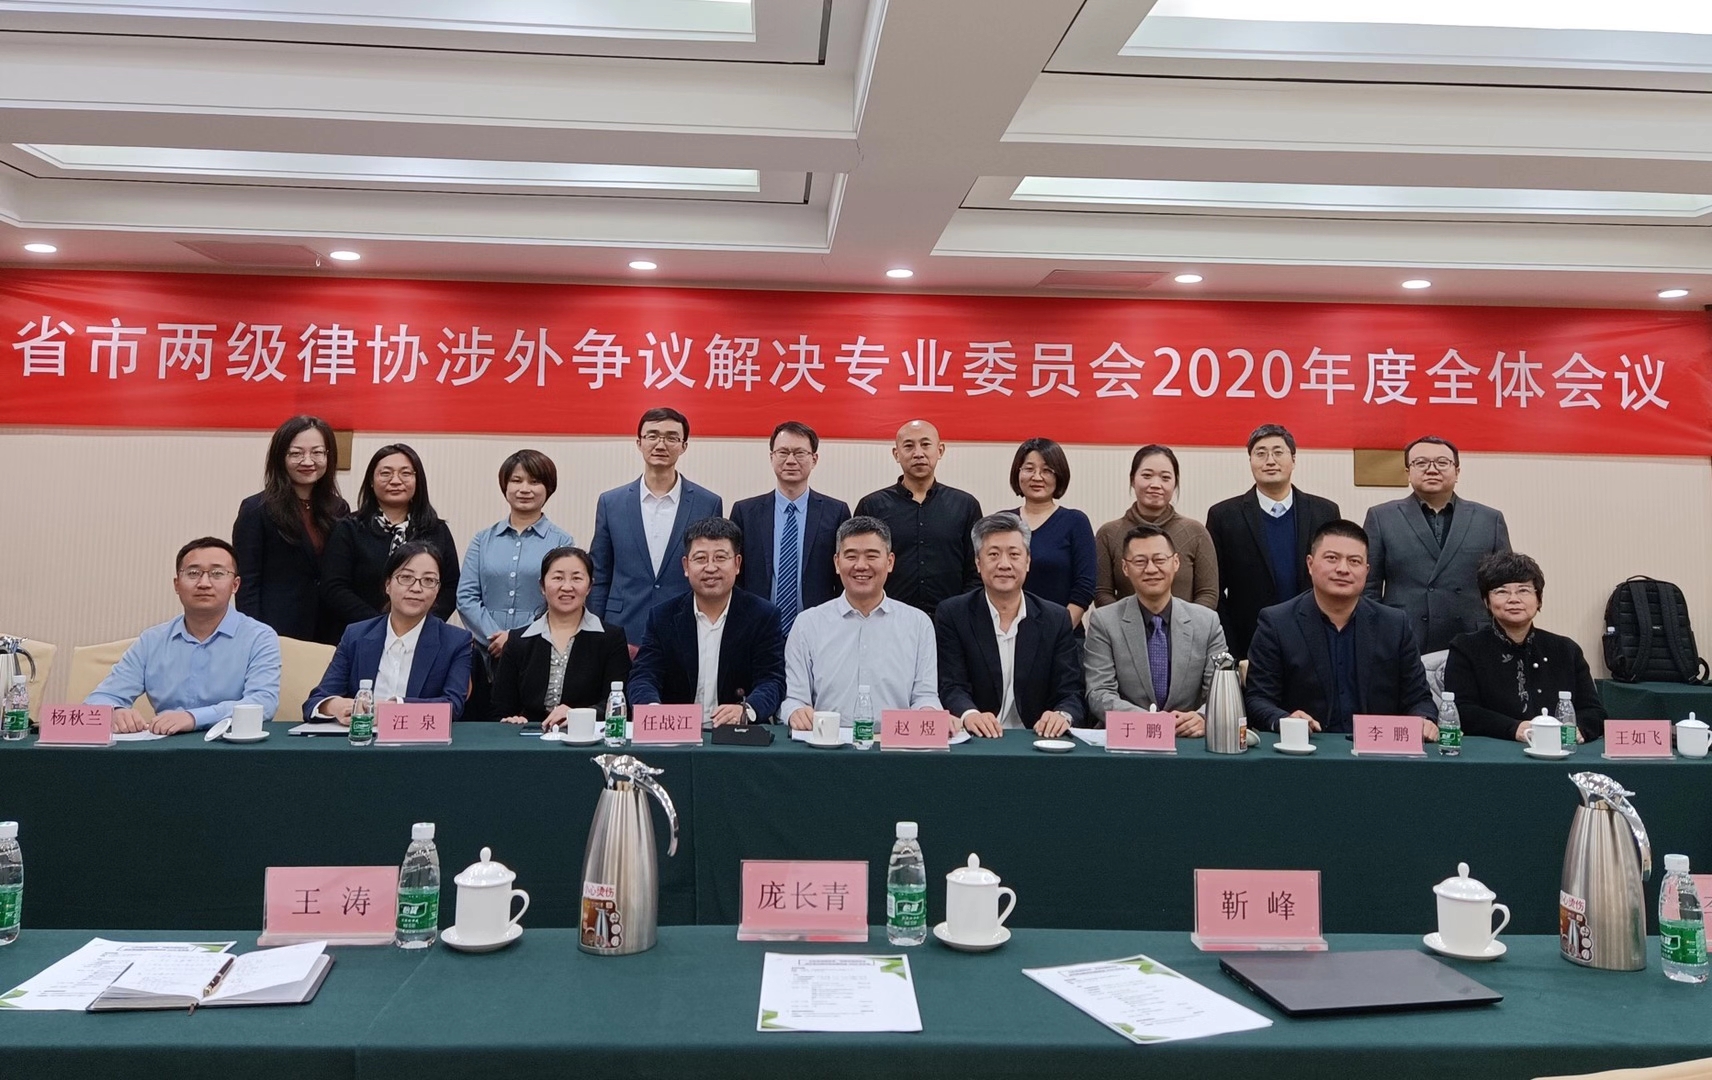 2020 Annual Meeting of the Shandong Lawyers Association was successfully held